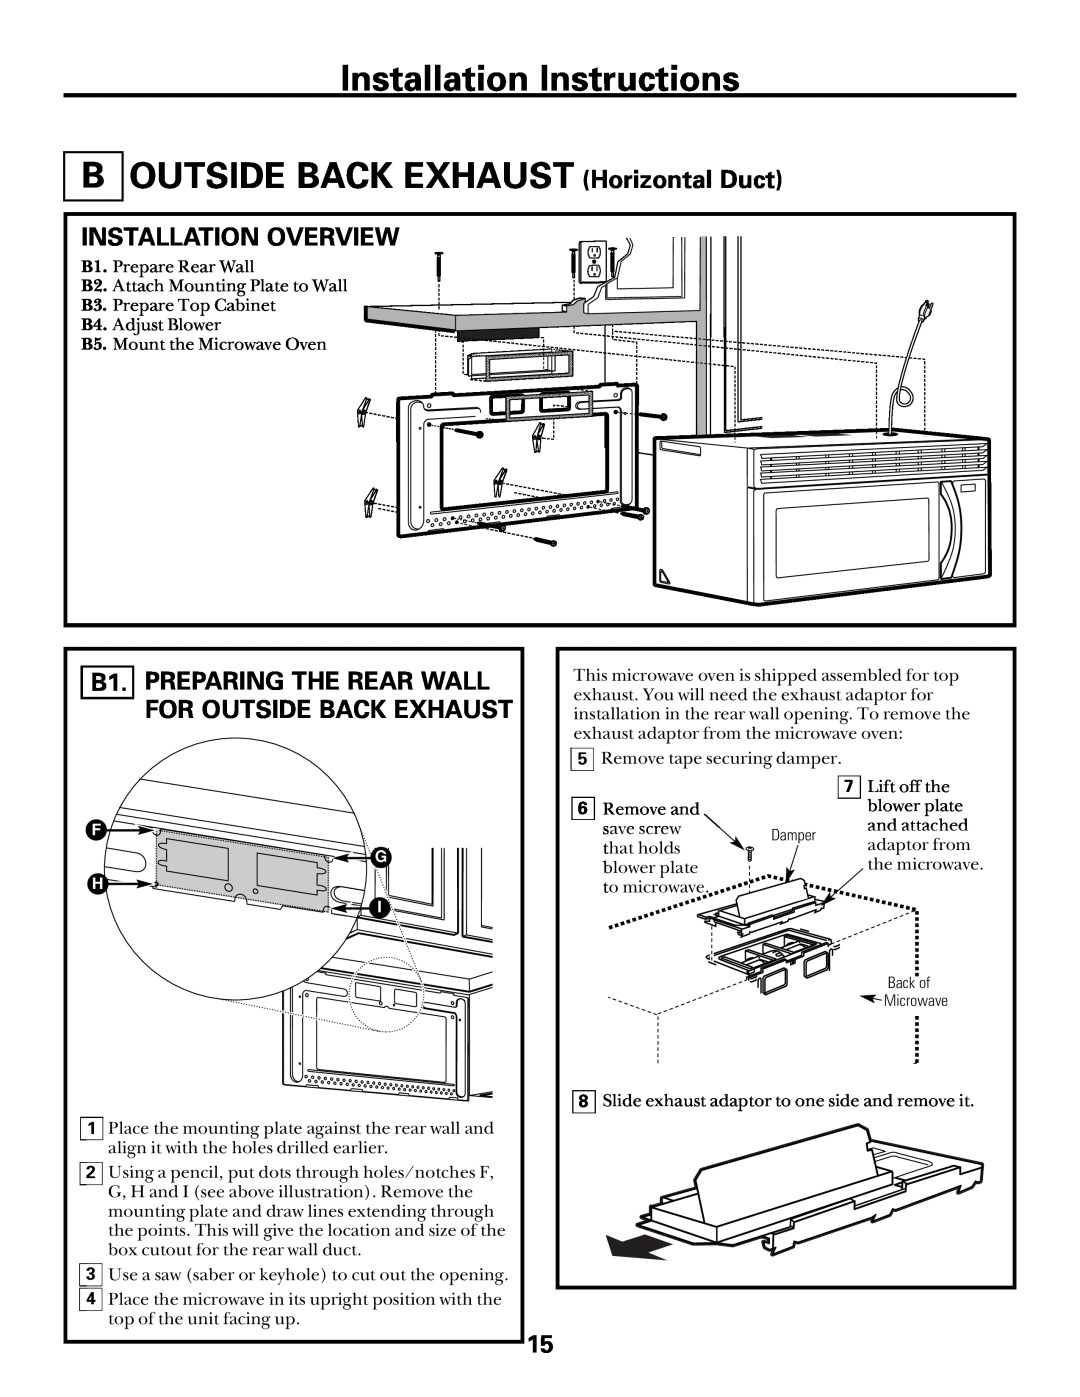 GE Over the Range Microwave Oven manual B1. PREPARING THE REAR WALL FOR OUTSIDE BACK EXHAUST, Installation Instructions 